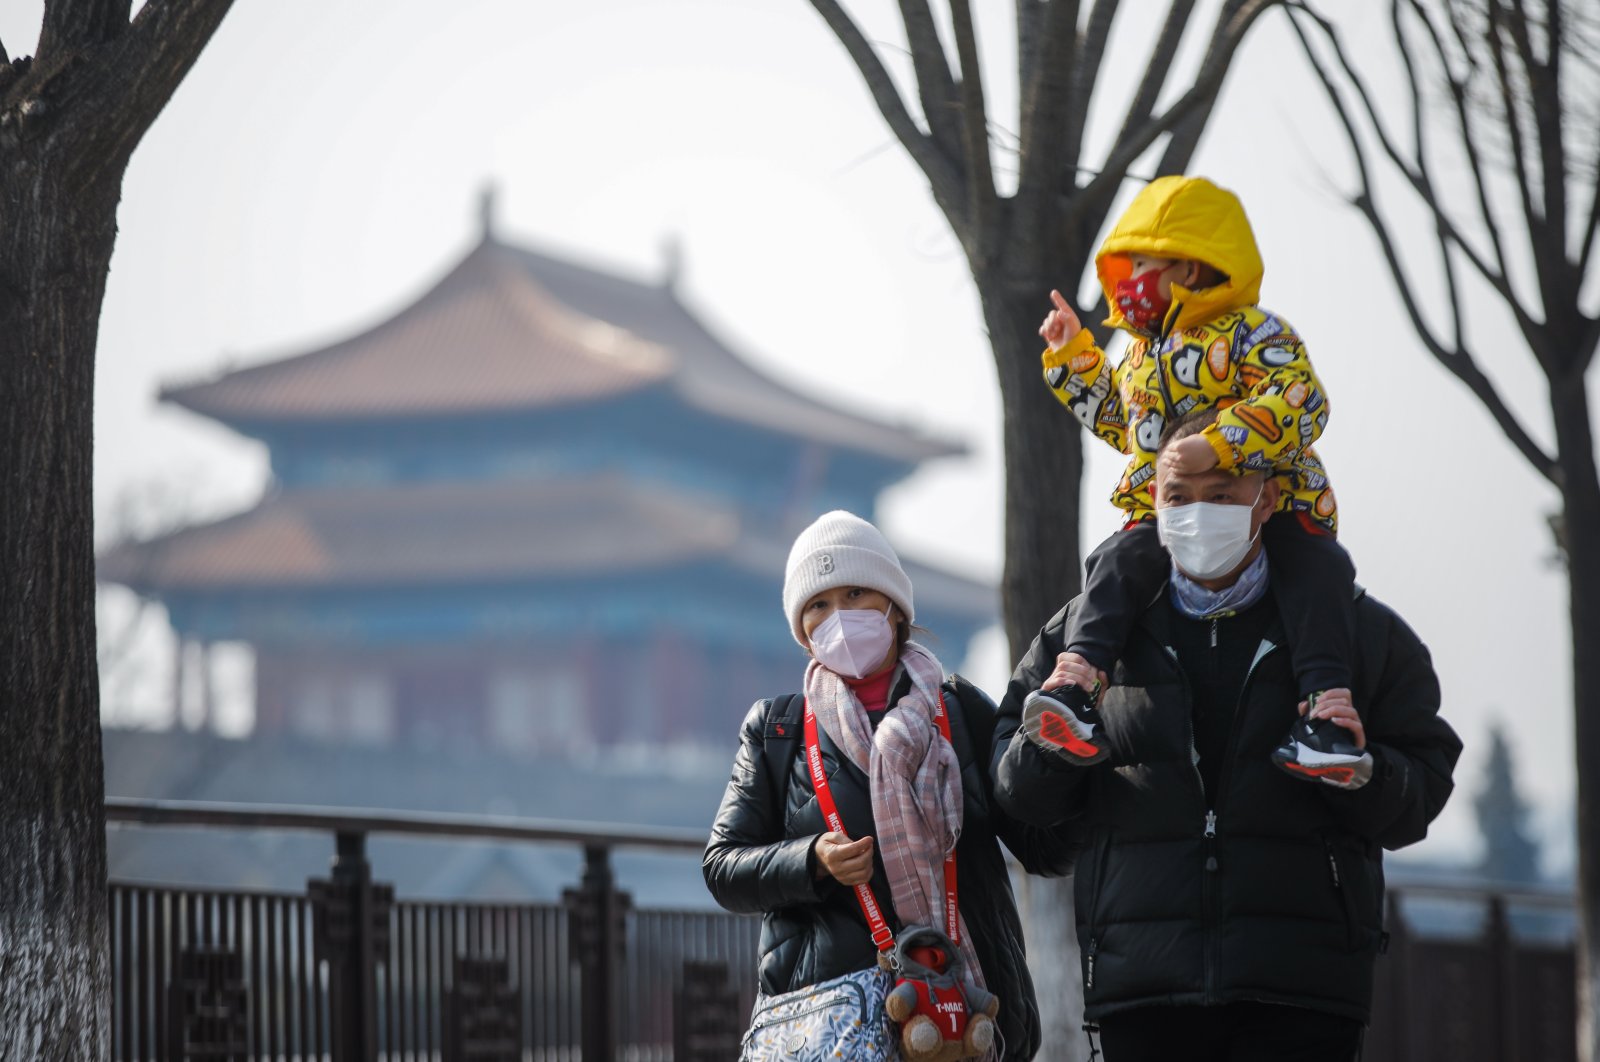 Tourists wearing face masks walk near the Turret of the Palace Museum in Beijing, China, Feb. 22, 2023. (EPA Photo)